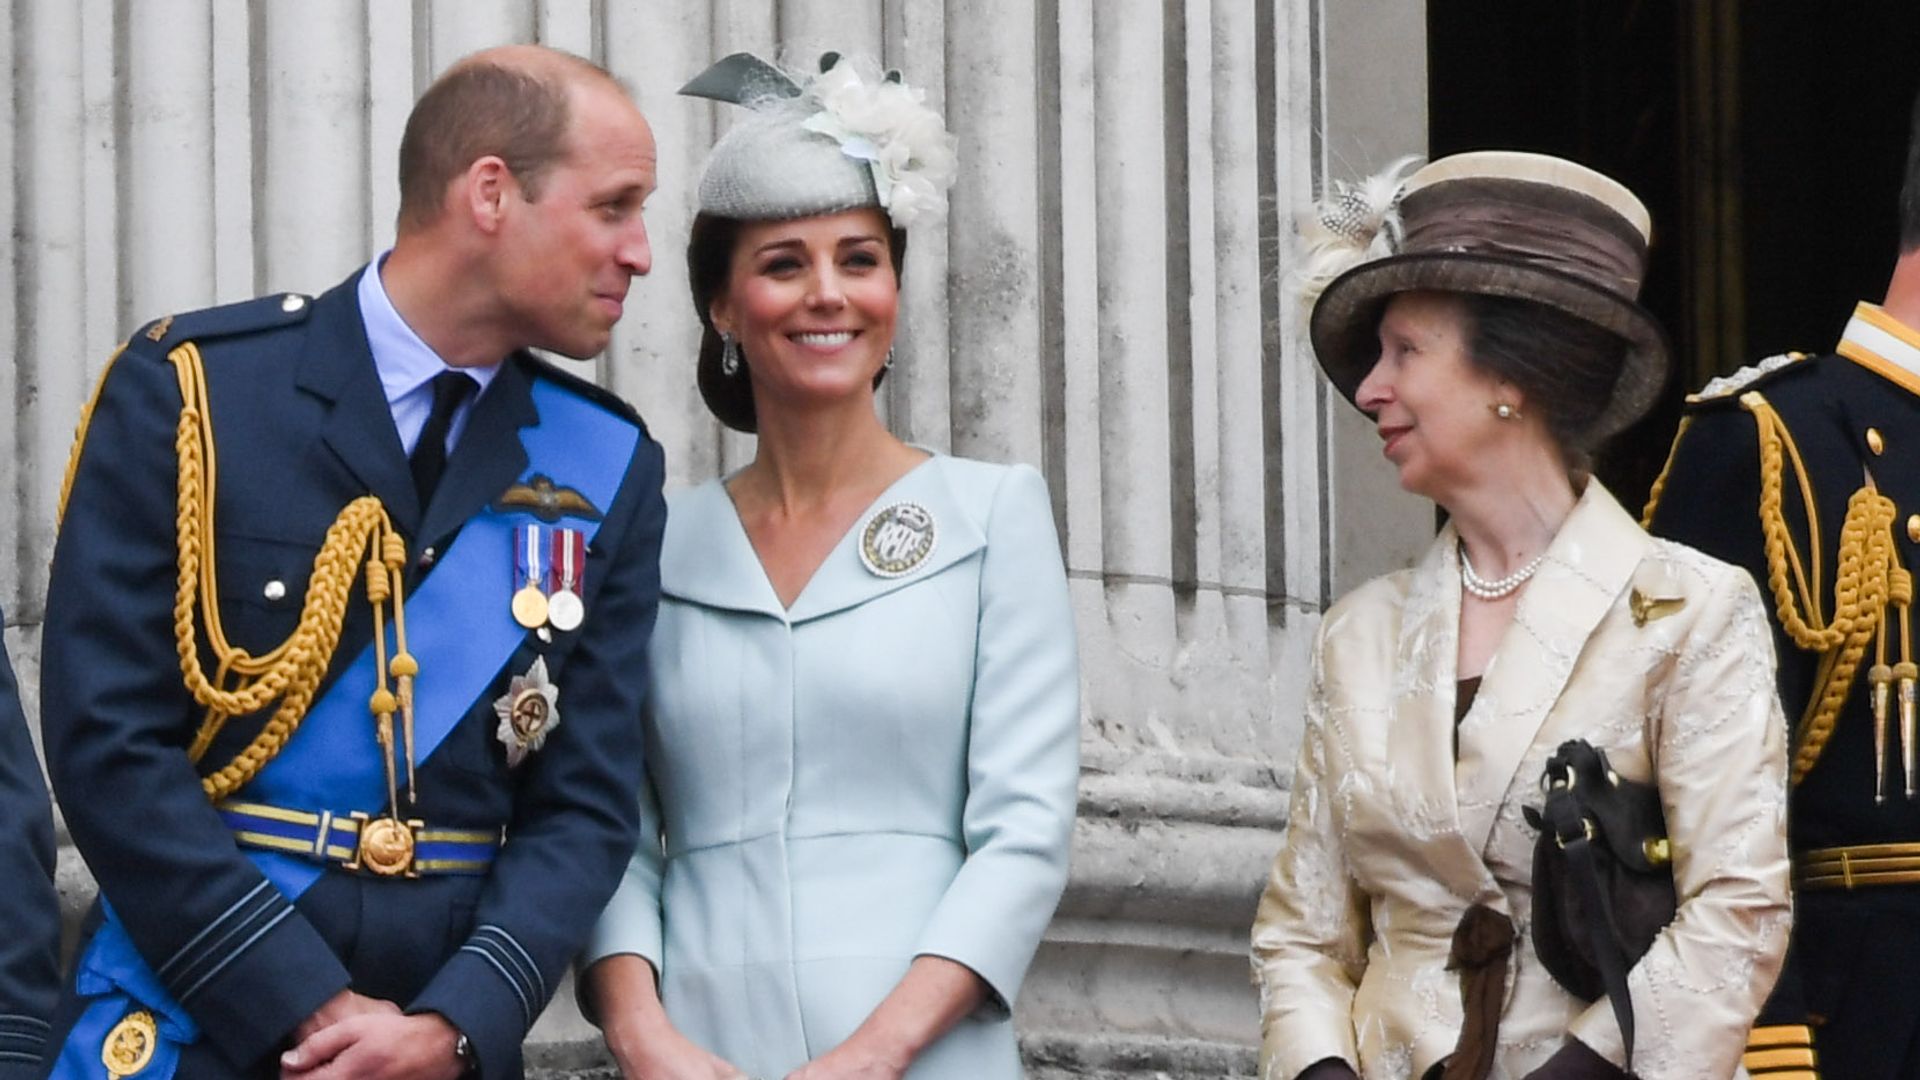 Anne speaking with William and Kate on palace balcony